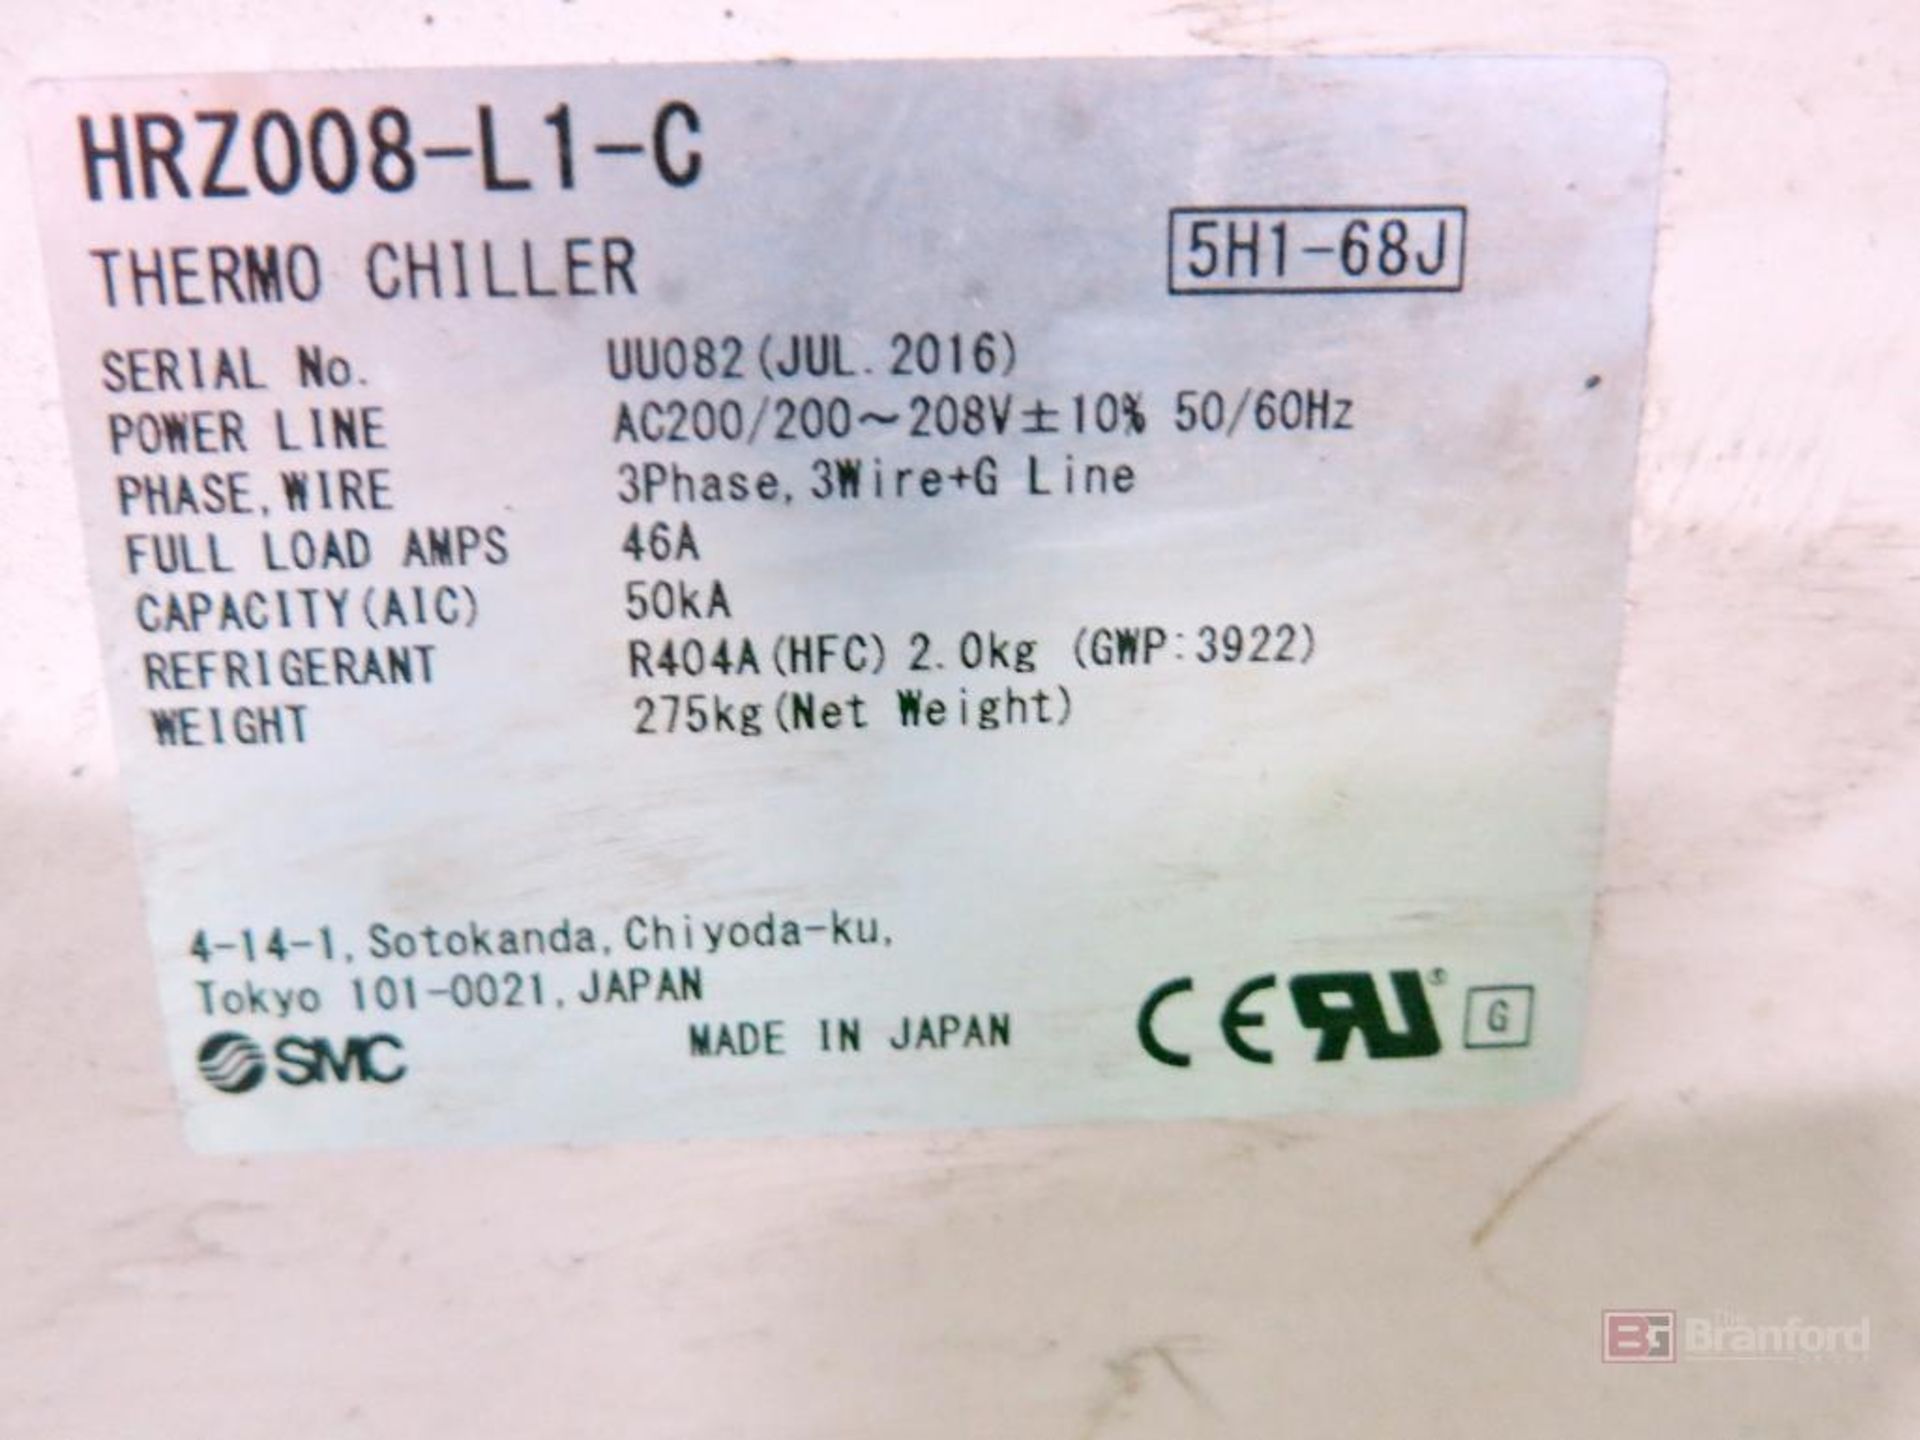 SMC Thermo Chiller Model HRZ008-L1-C - Image 3 of 3